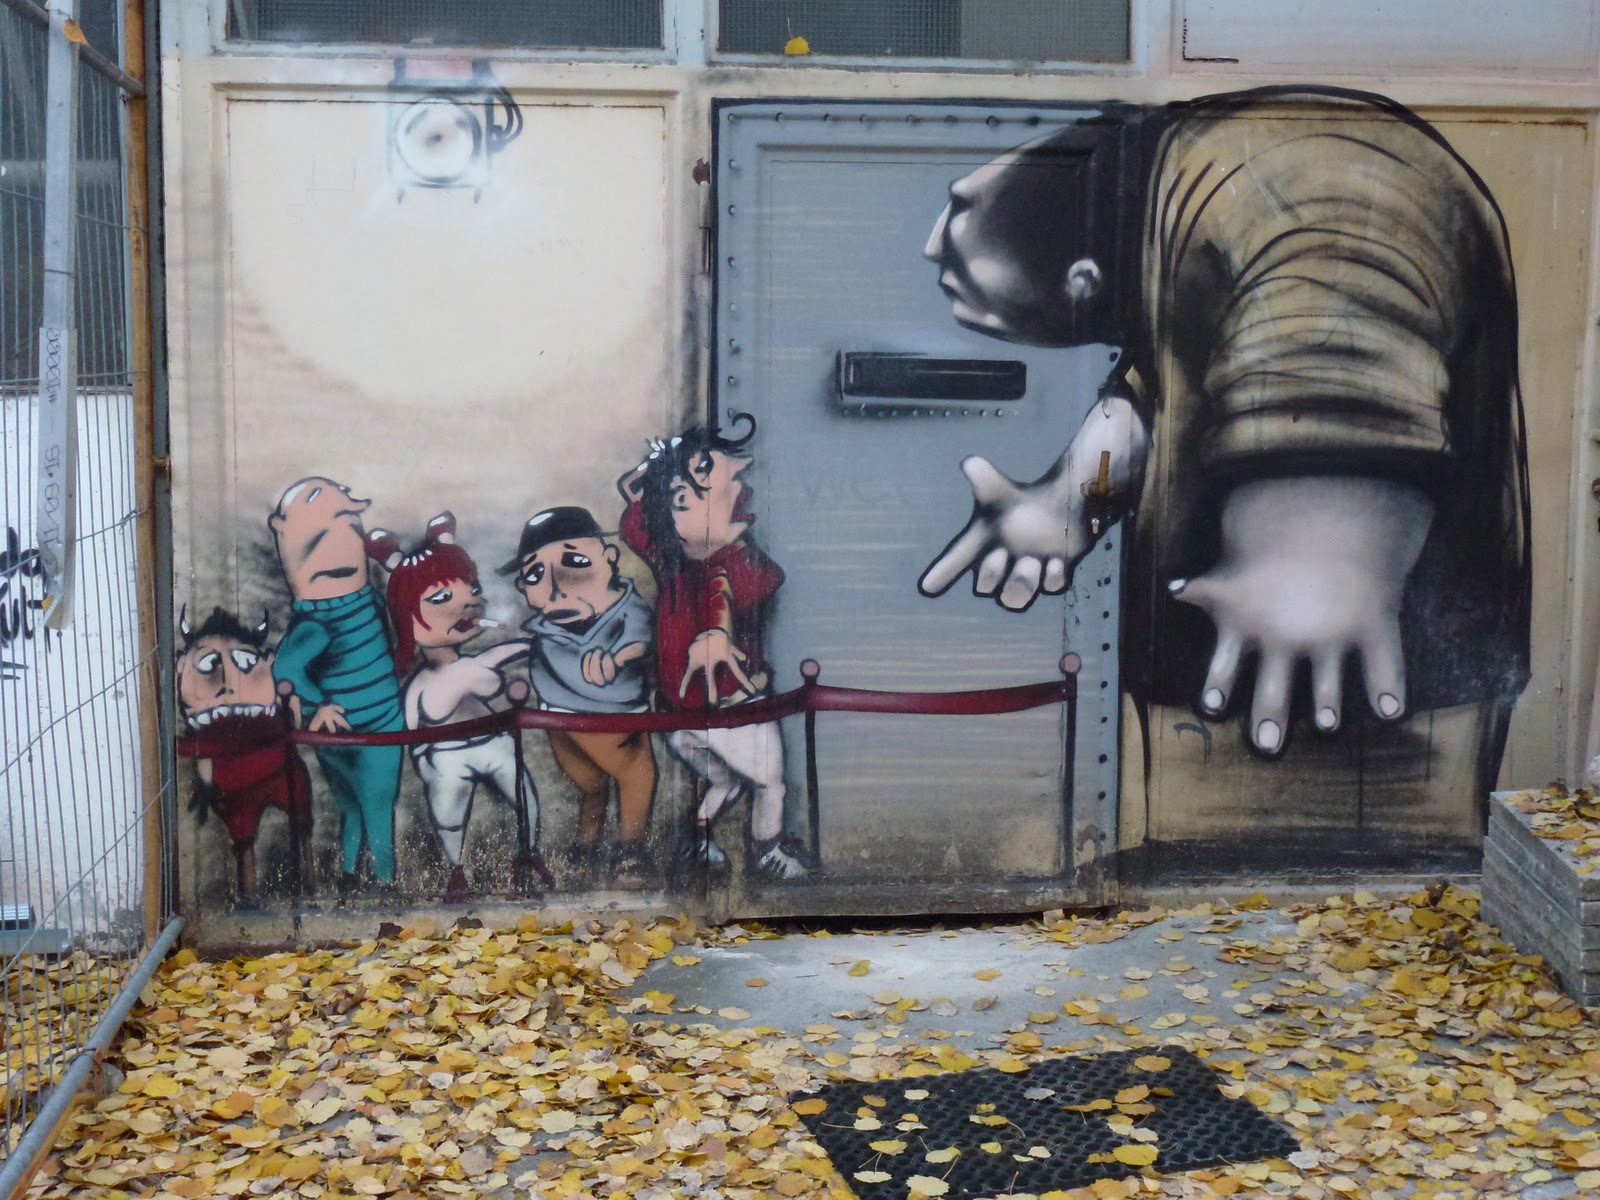 Toylessons Vol 1 Berliner Graffiti Action At Its Best Als Full